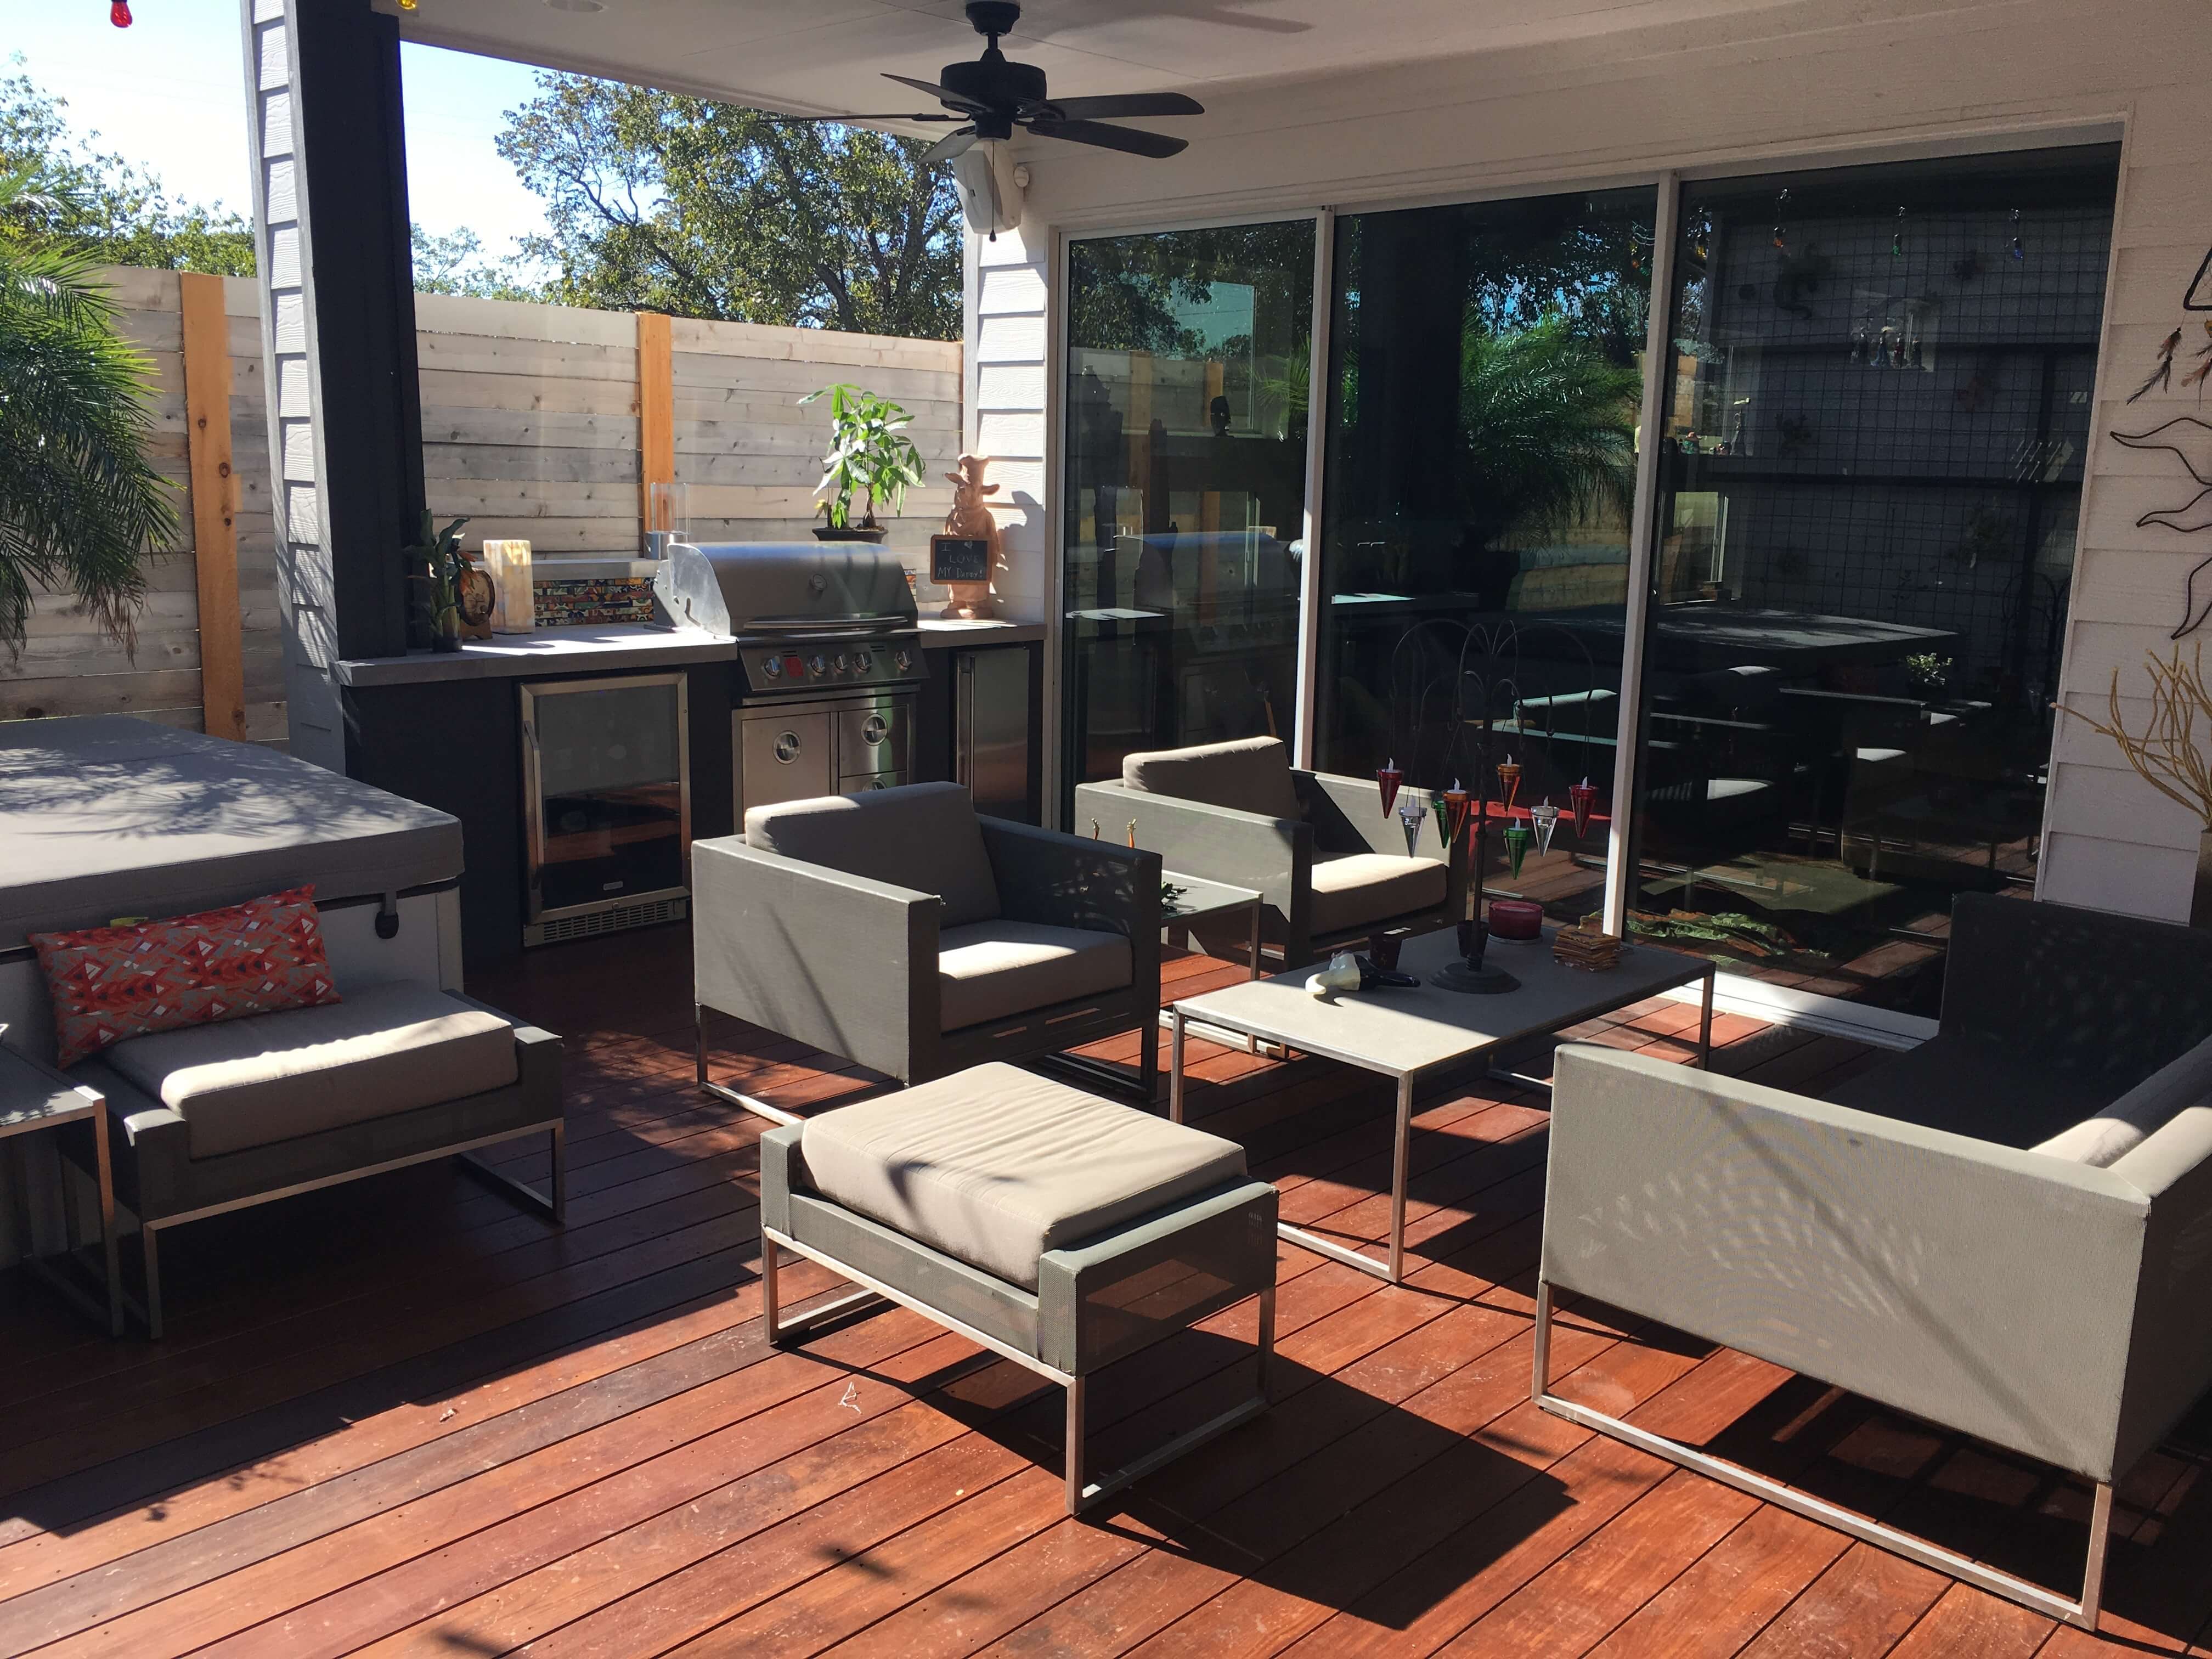 Patio seating area and barbeque